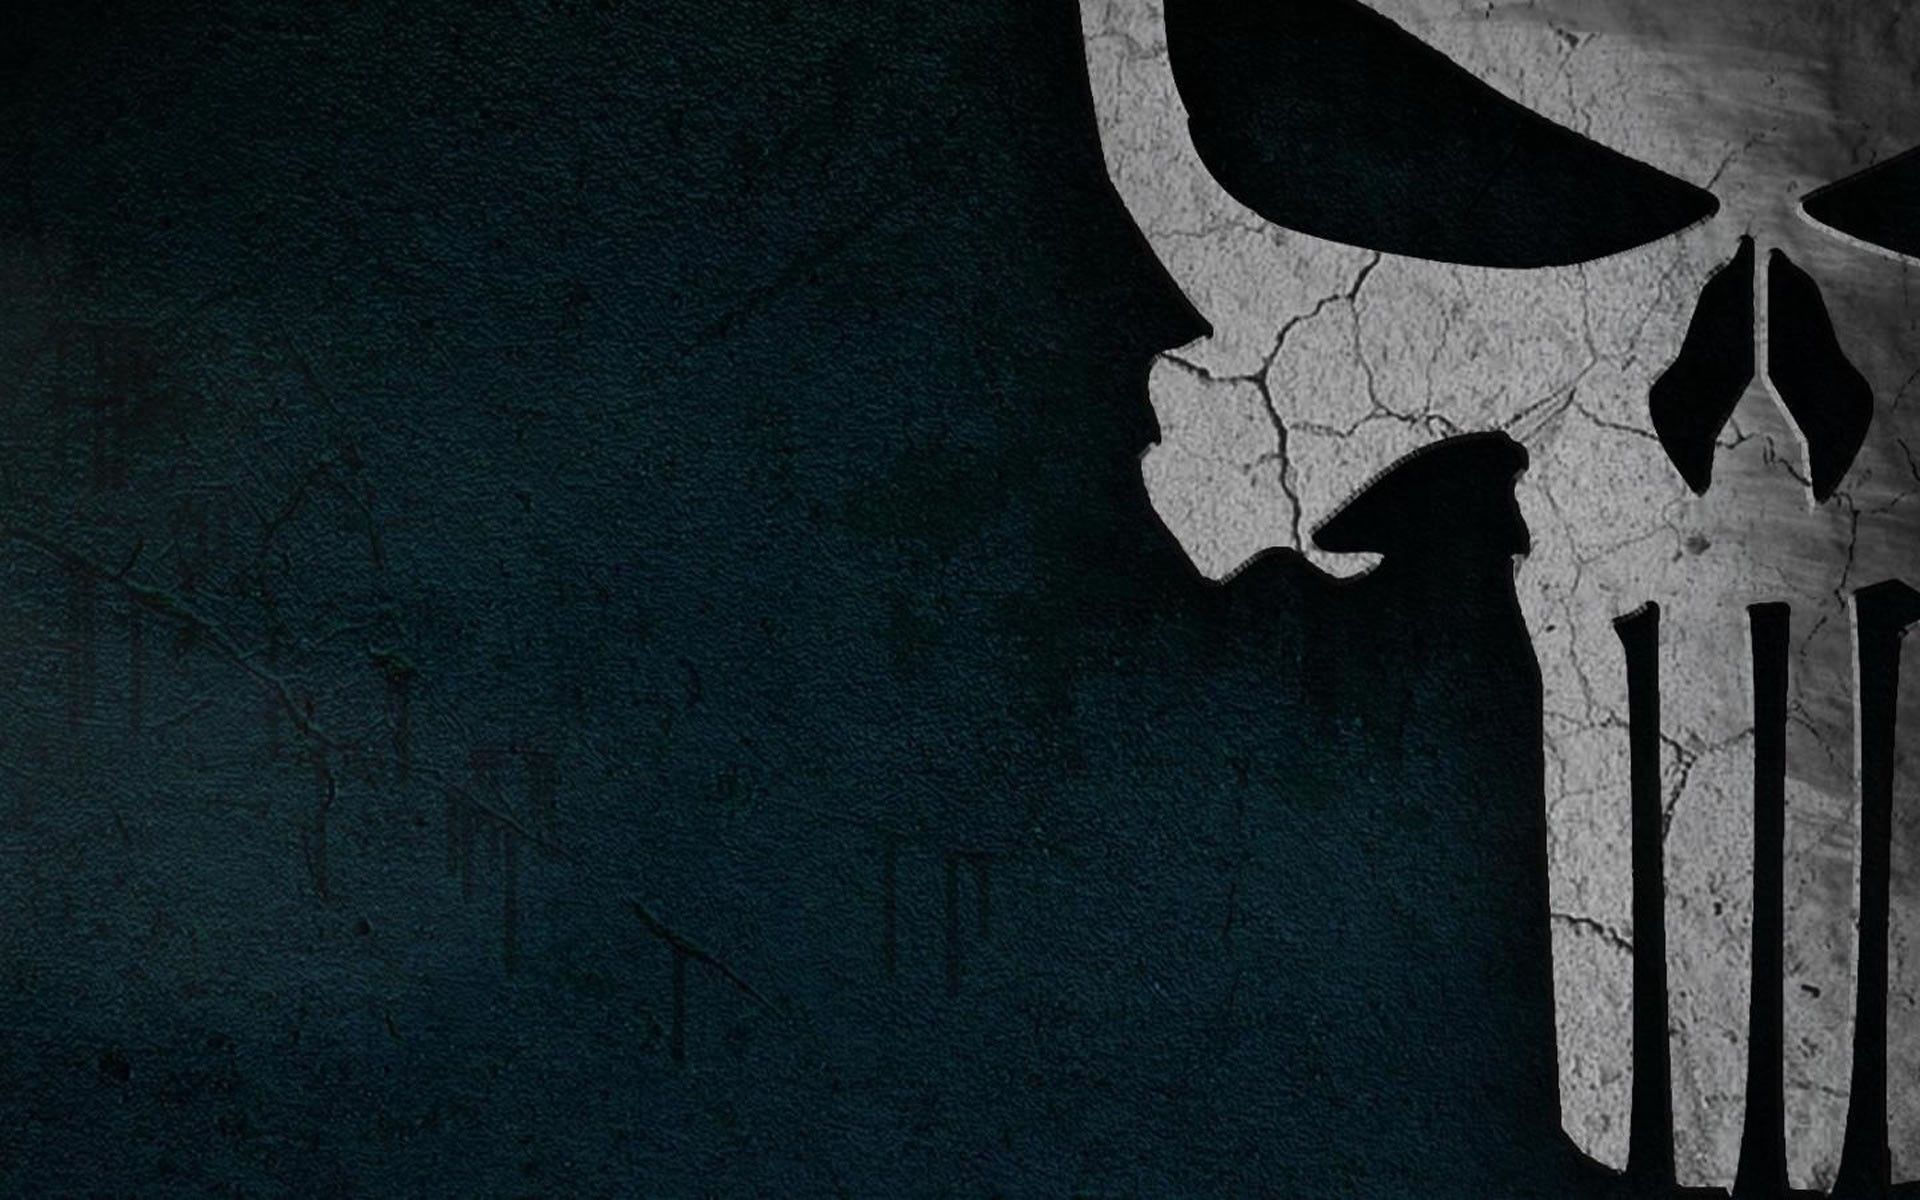 174 The Punisher HD Wallpapers | Backgrounds - Wallpaper Abyss